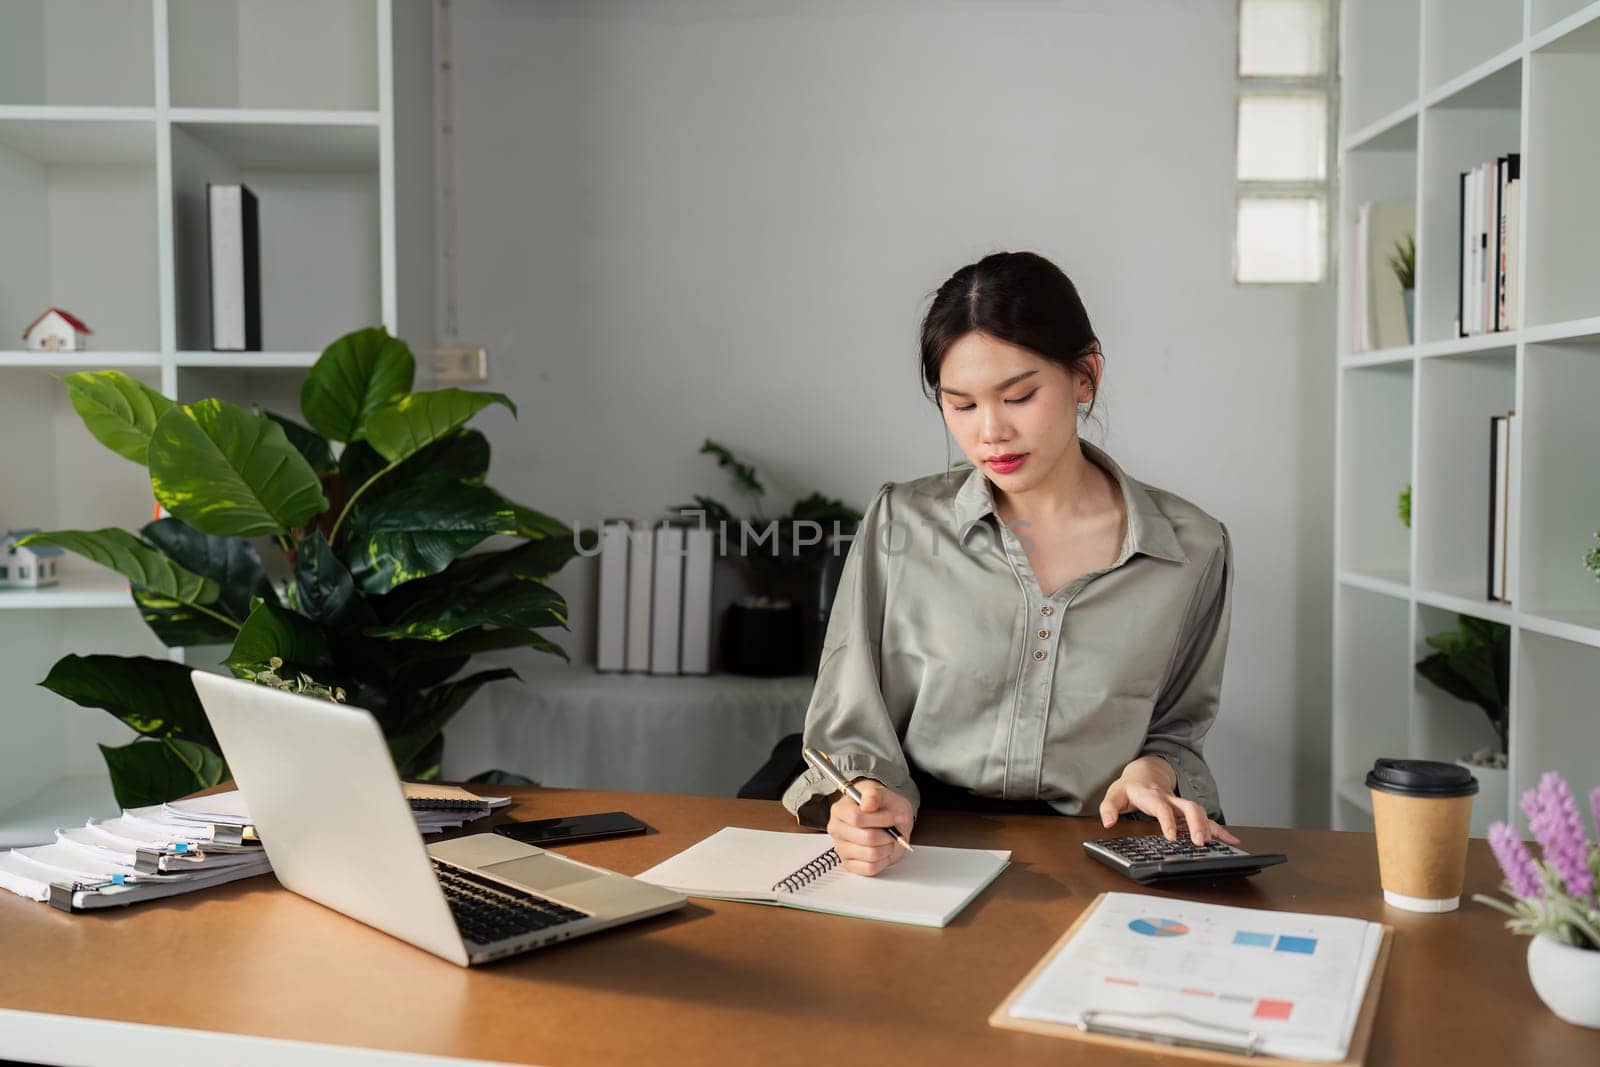 A woman is sitting at a desk with a calculator and a pen. She is writing in a notebook